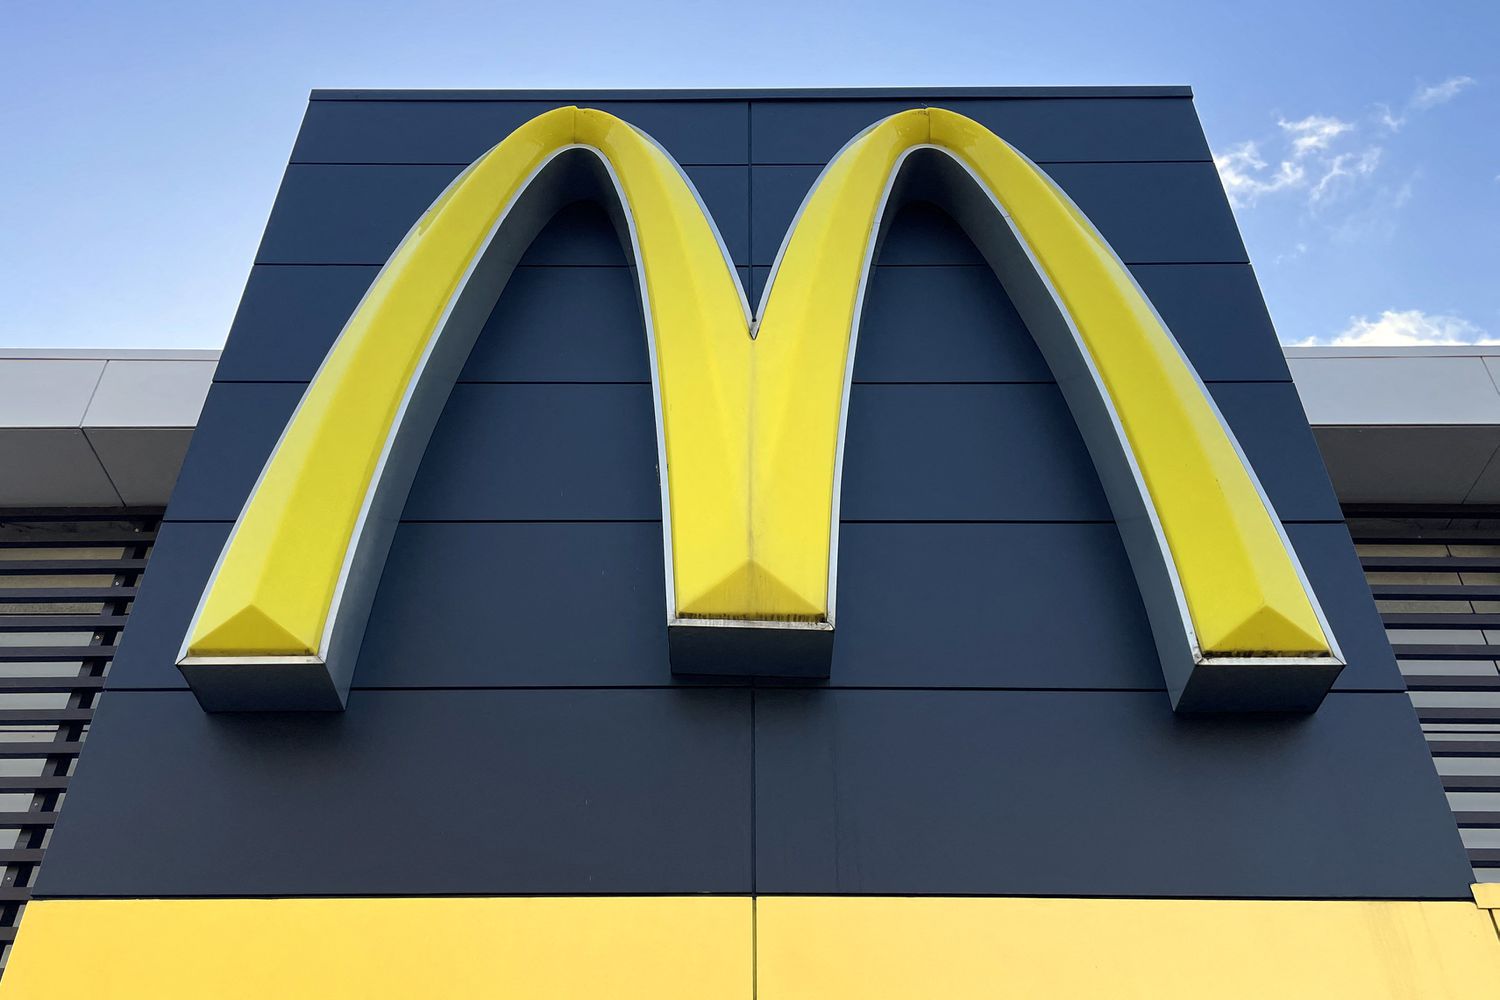 What You Need To Know Ahead of McDonald